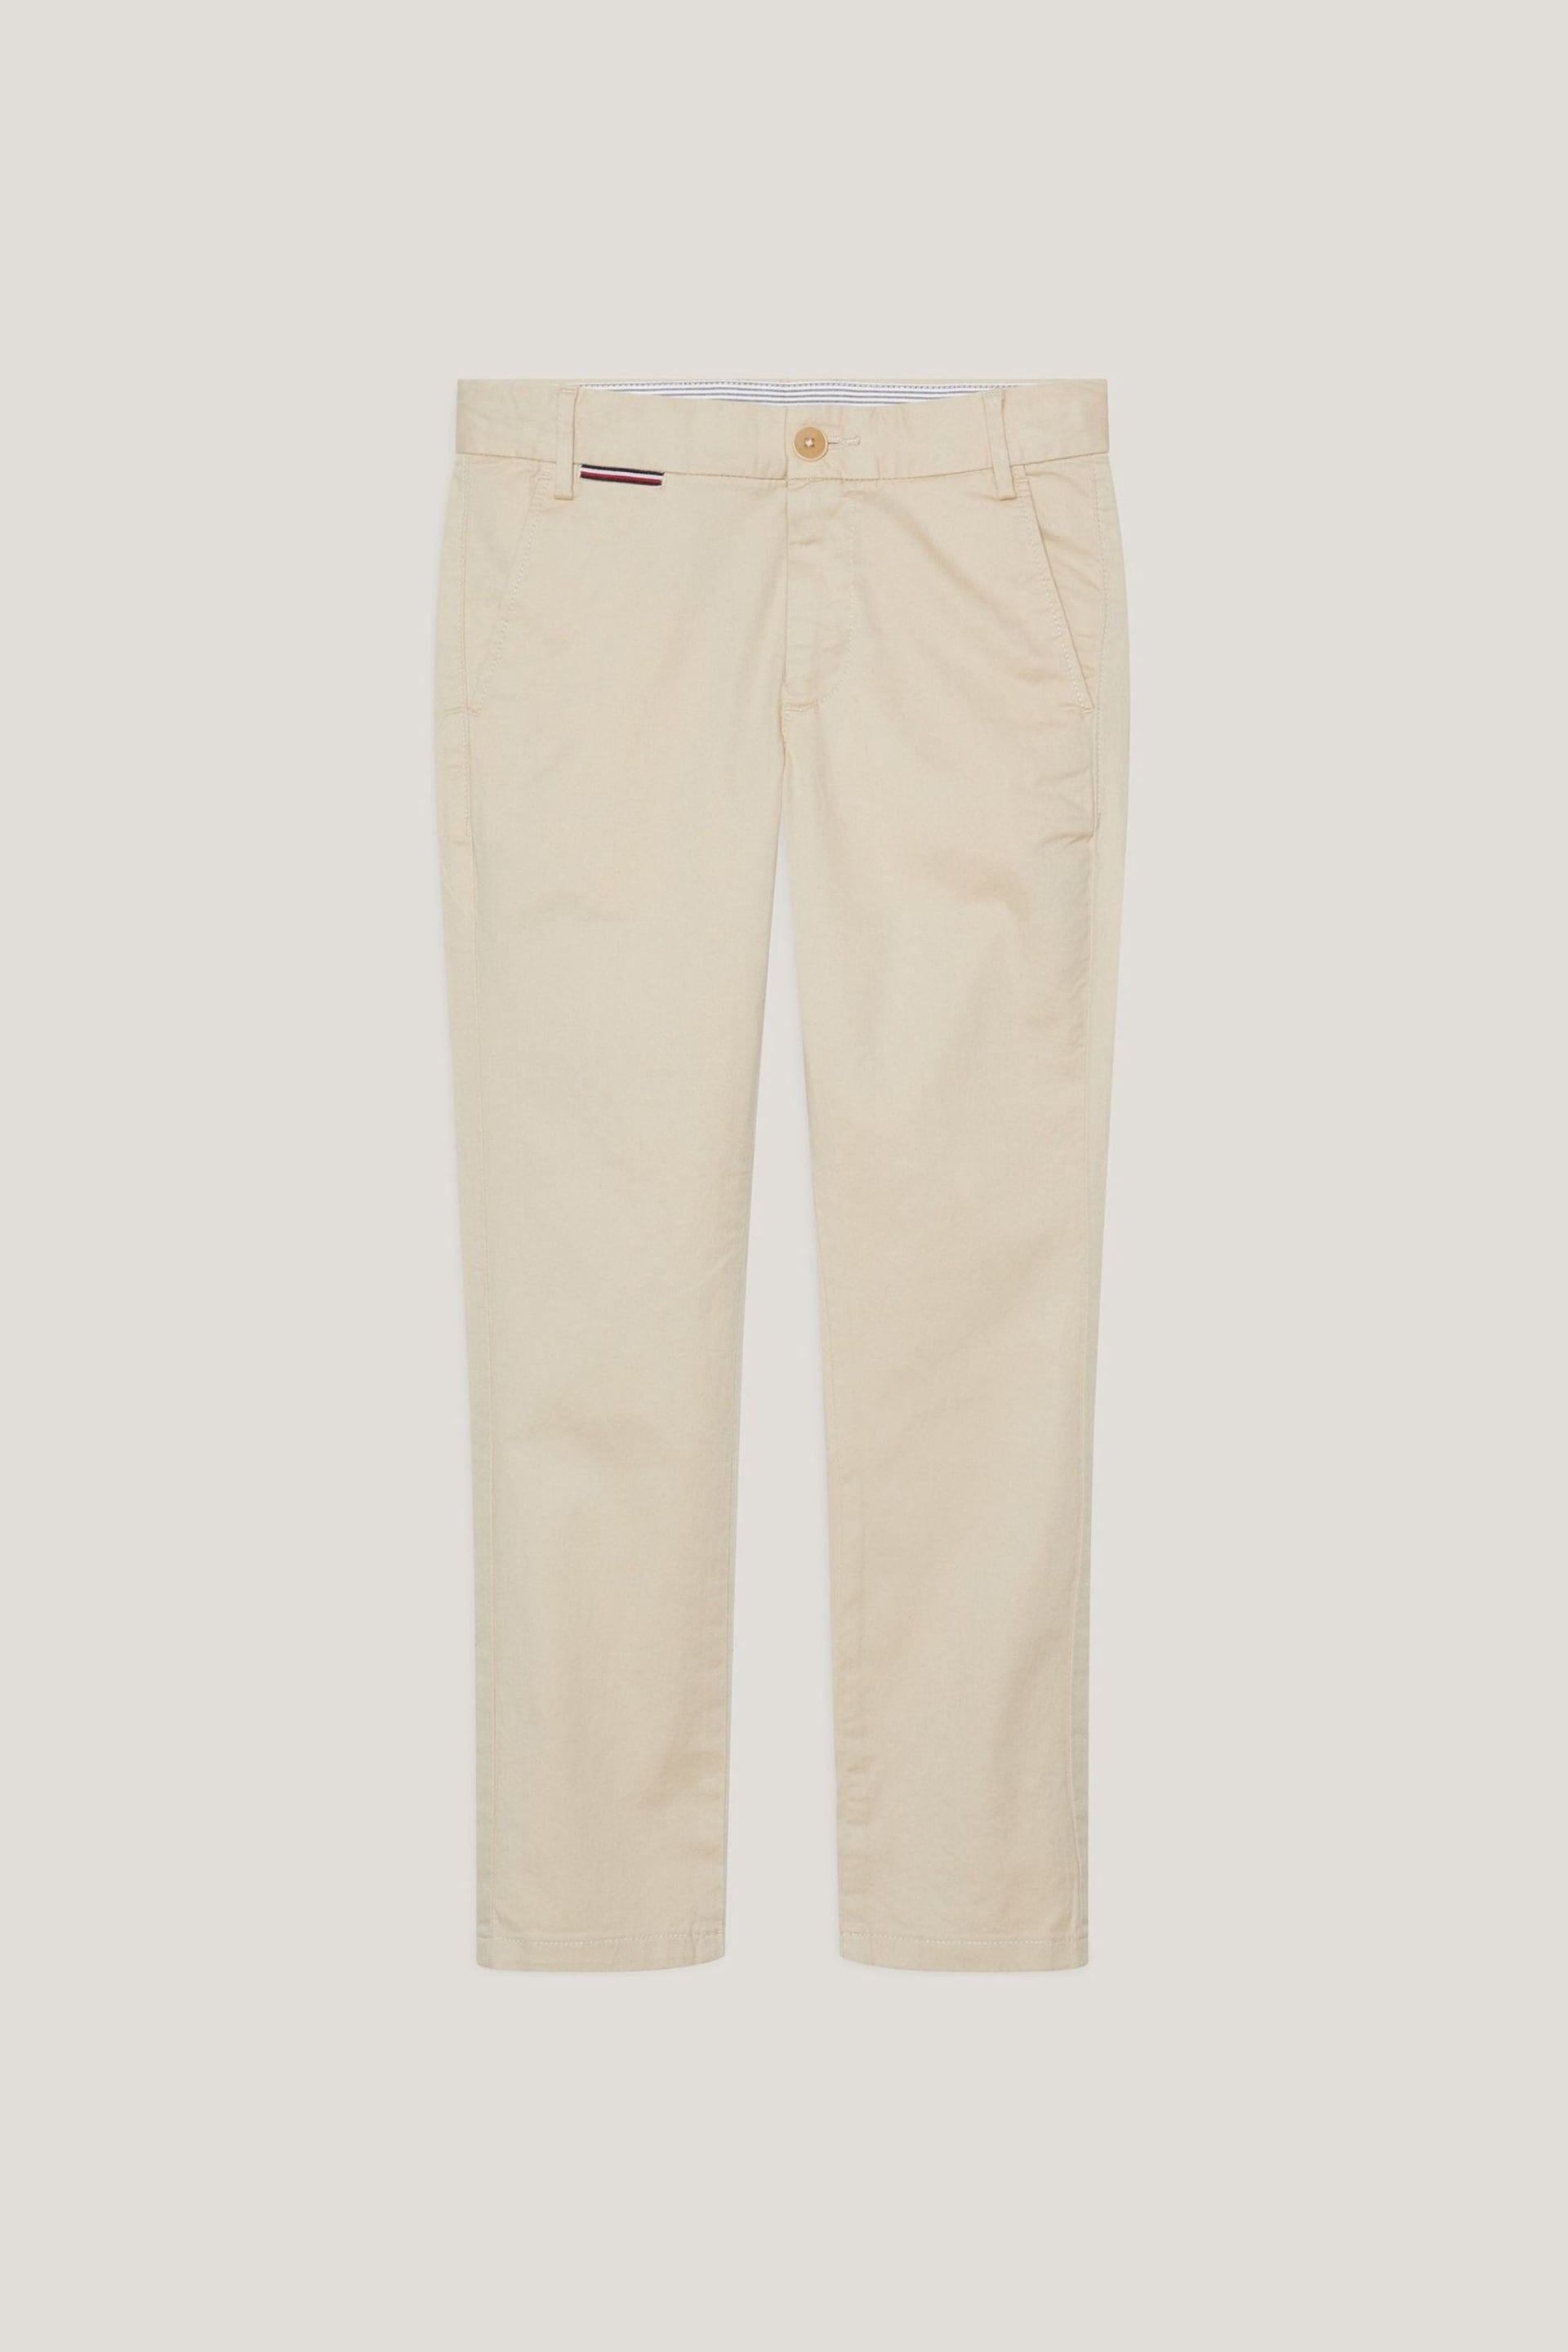 Tommy Hilfiger 1985 Cream Chino Trousers - Image 1 of 3